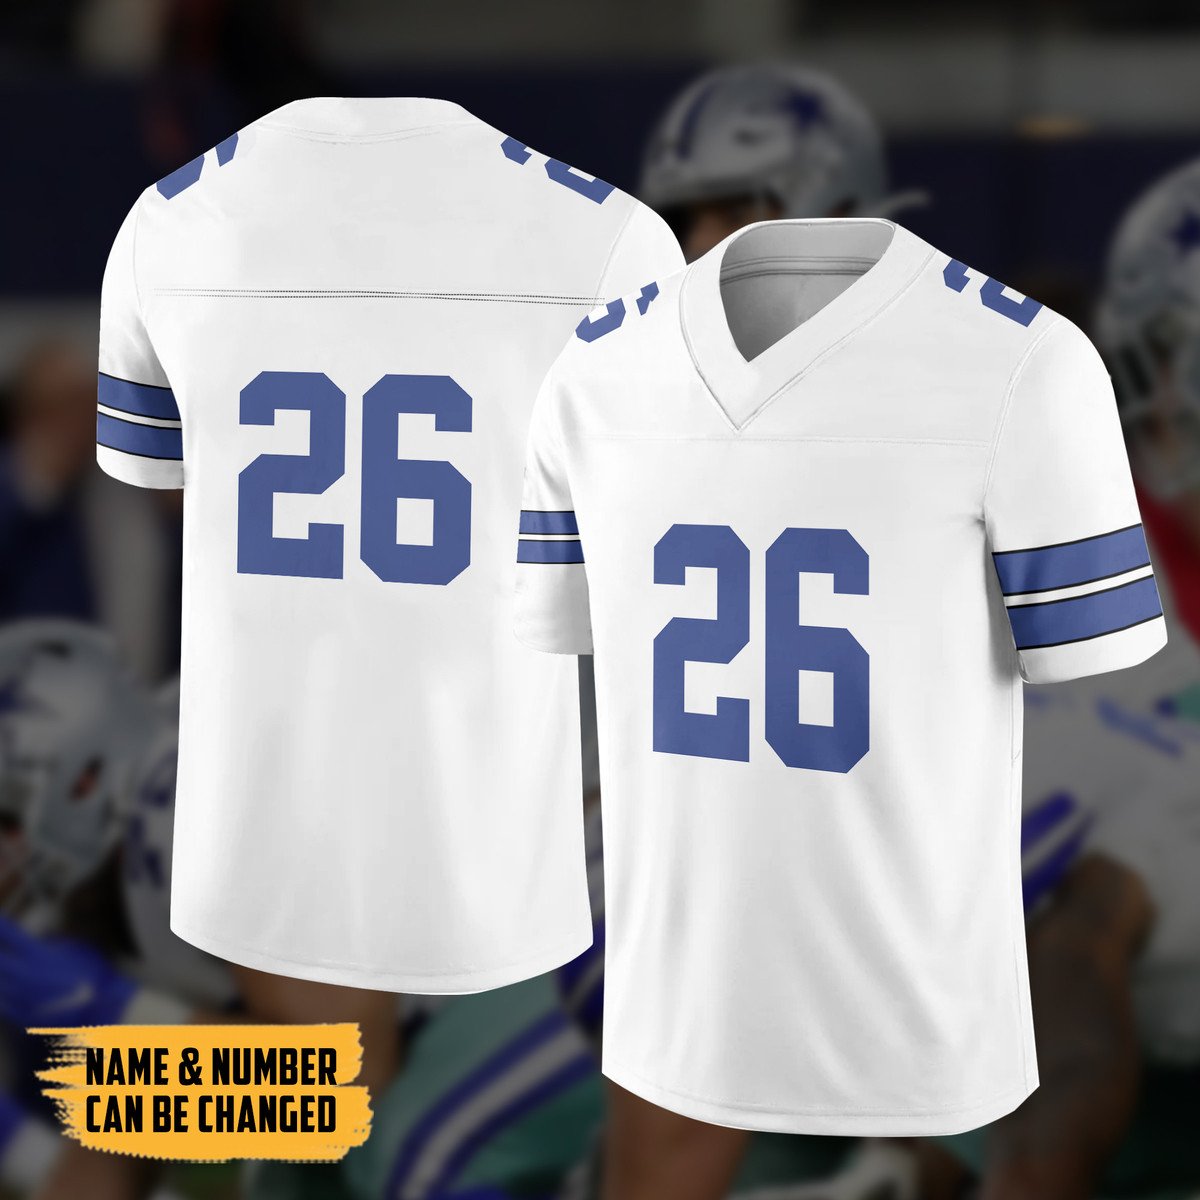 TOP Dallas Cowboyy Personalized Custom Football All Over Print Jersey 4